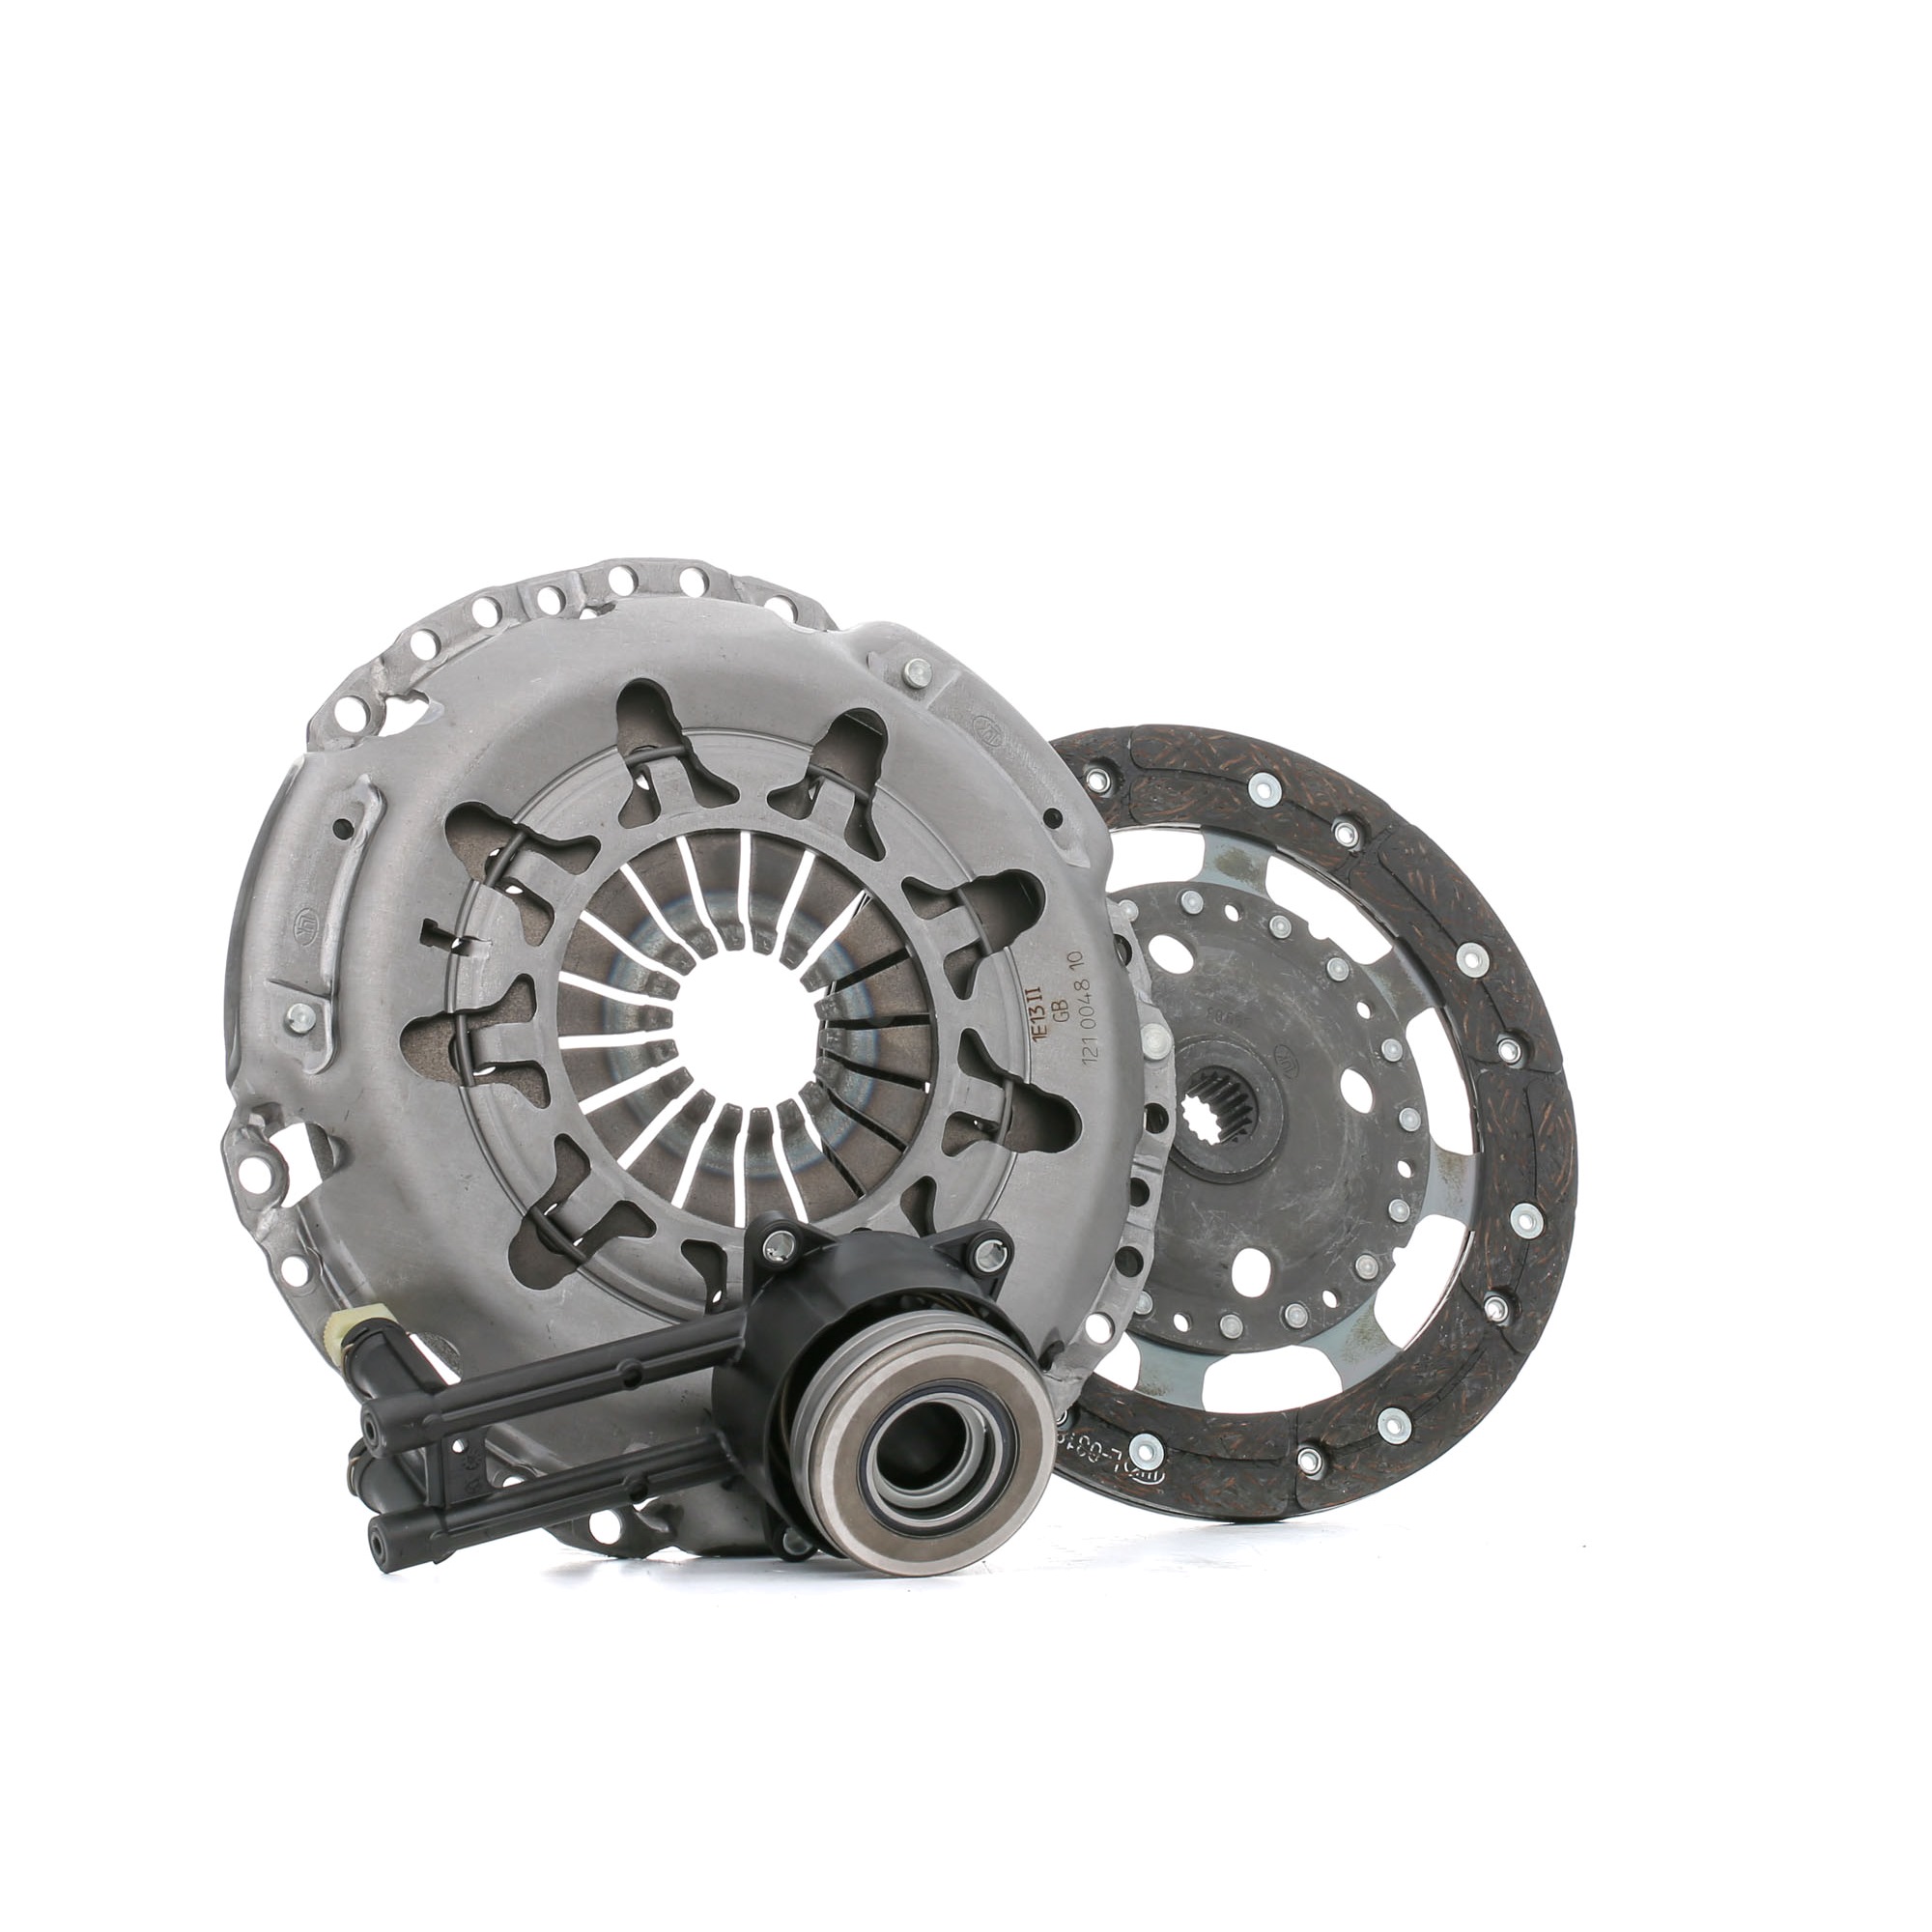 LuK 621 3011 33 Clutch kit with central slave cylinder, with clutch disc, 210mm